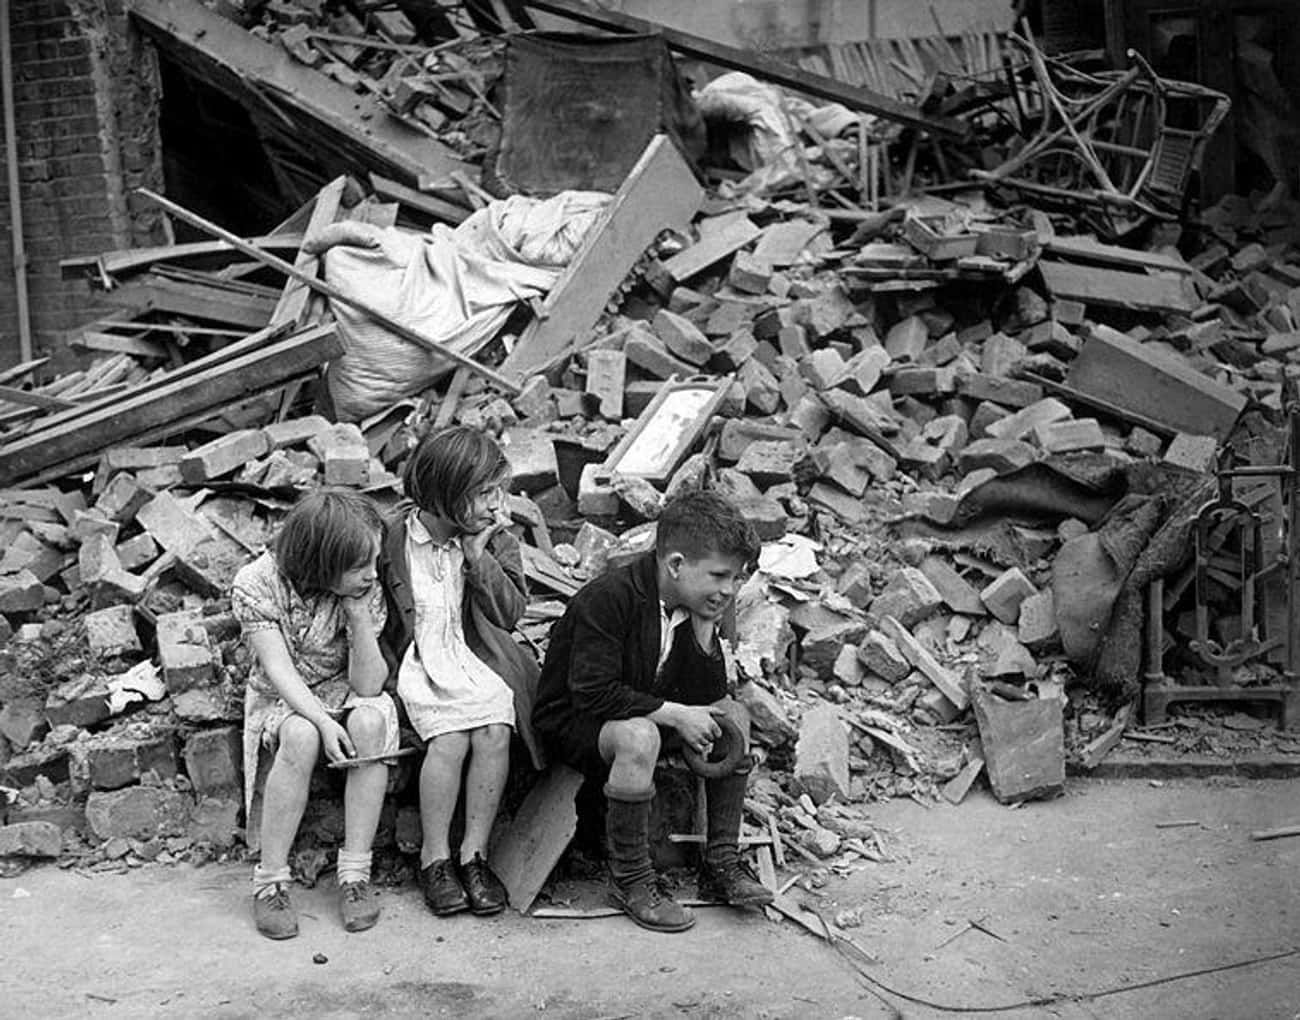 Britain Was In A Bad Spot After World War II, And Decolonization Only Made It Worse